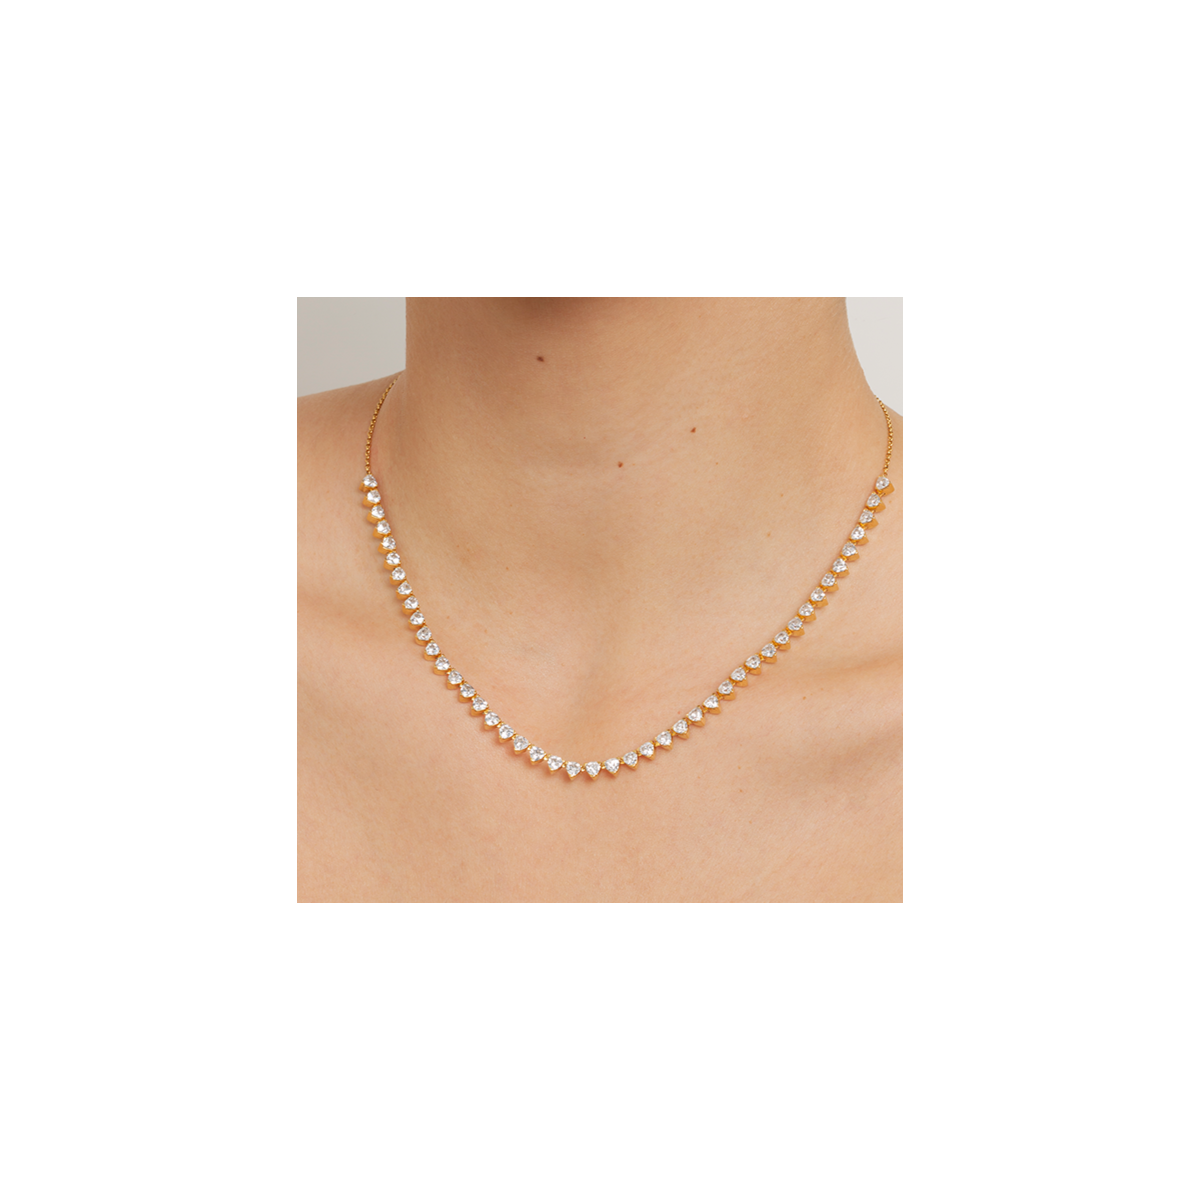 Additional Image 3 for  näas Empowering 6 7/8 ctw Trillion Lab Grown Diamond Fashion Necklace with Adjustable Chain